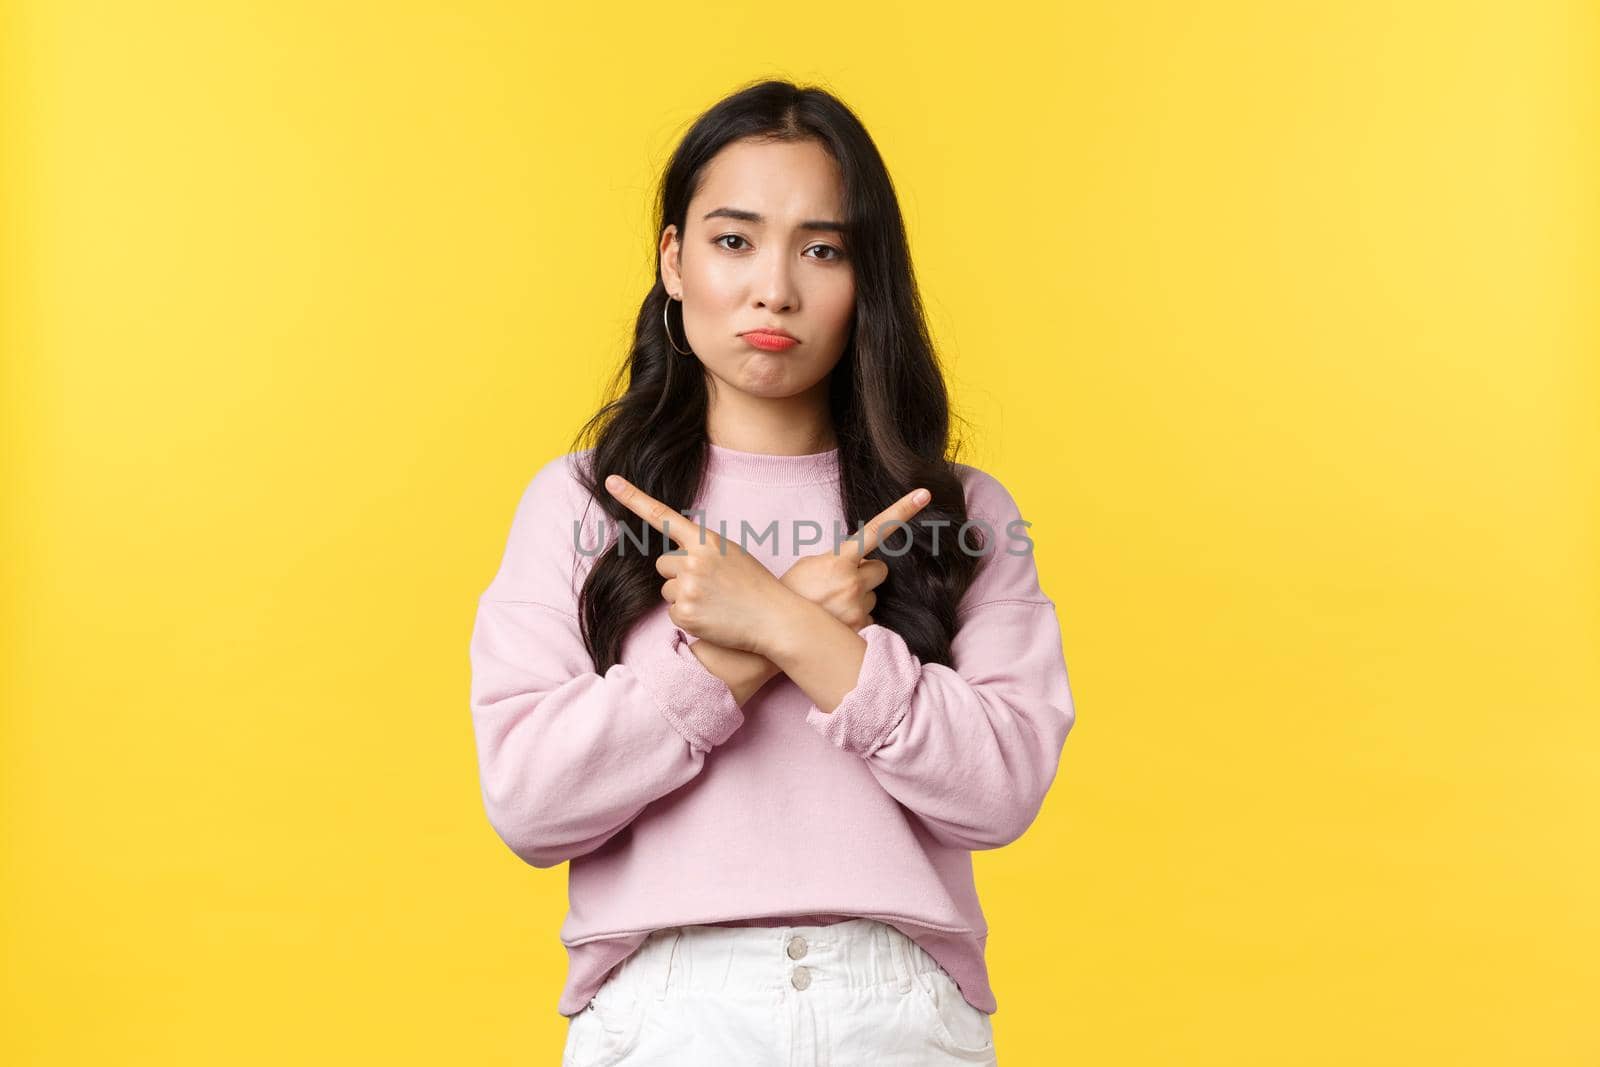 People emotions, lifestyle and fashion concept. Indecisive sad woman troubled making choice, pouting upset and pointing sideways at left and right variants, standing yellow background.